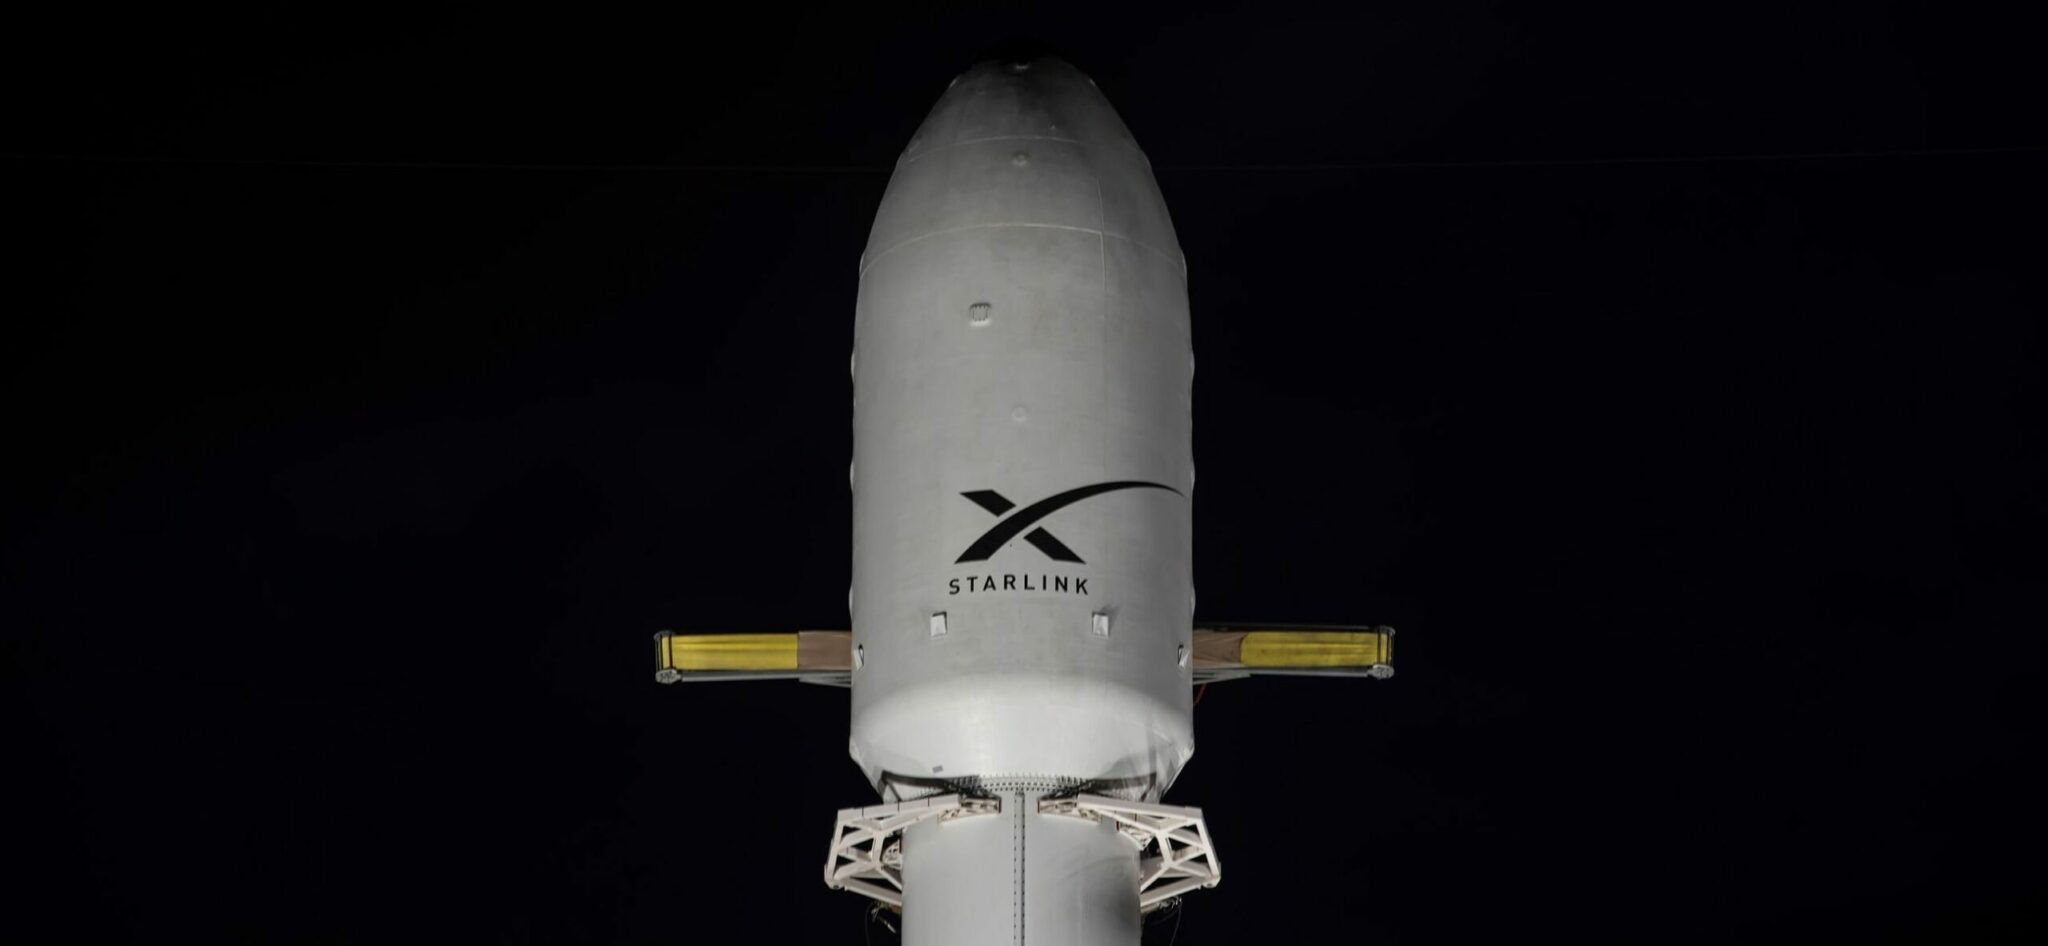 Launch Page Starlink1 vertical 18 DESKTOP c851b30656 scaled o7y6B7 SpaceX